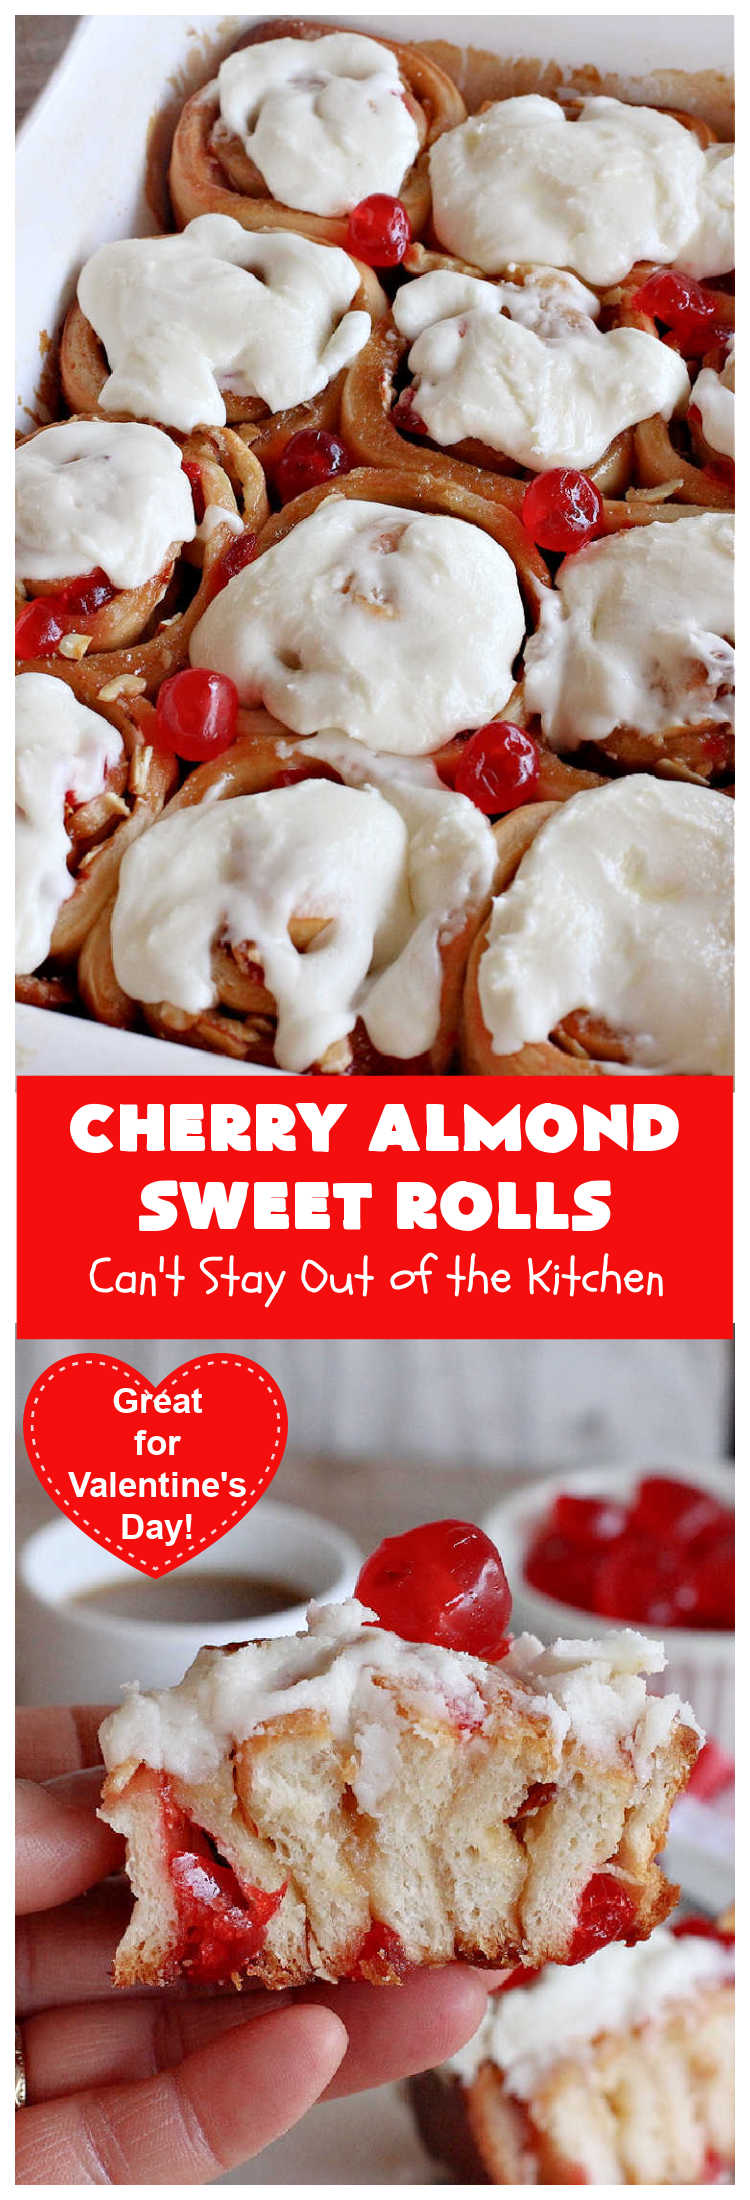 Cherry Almond Sweet Rolls | Can't Stay Out of the Kitchen